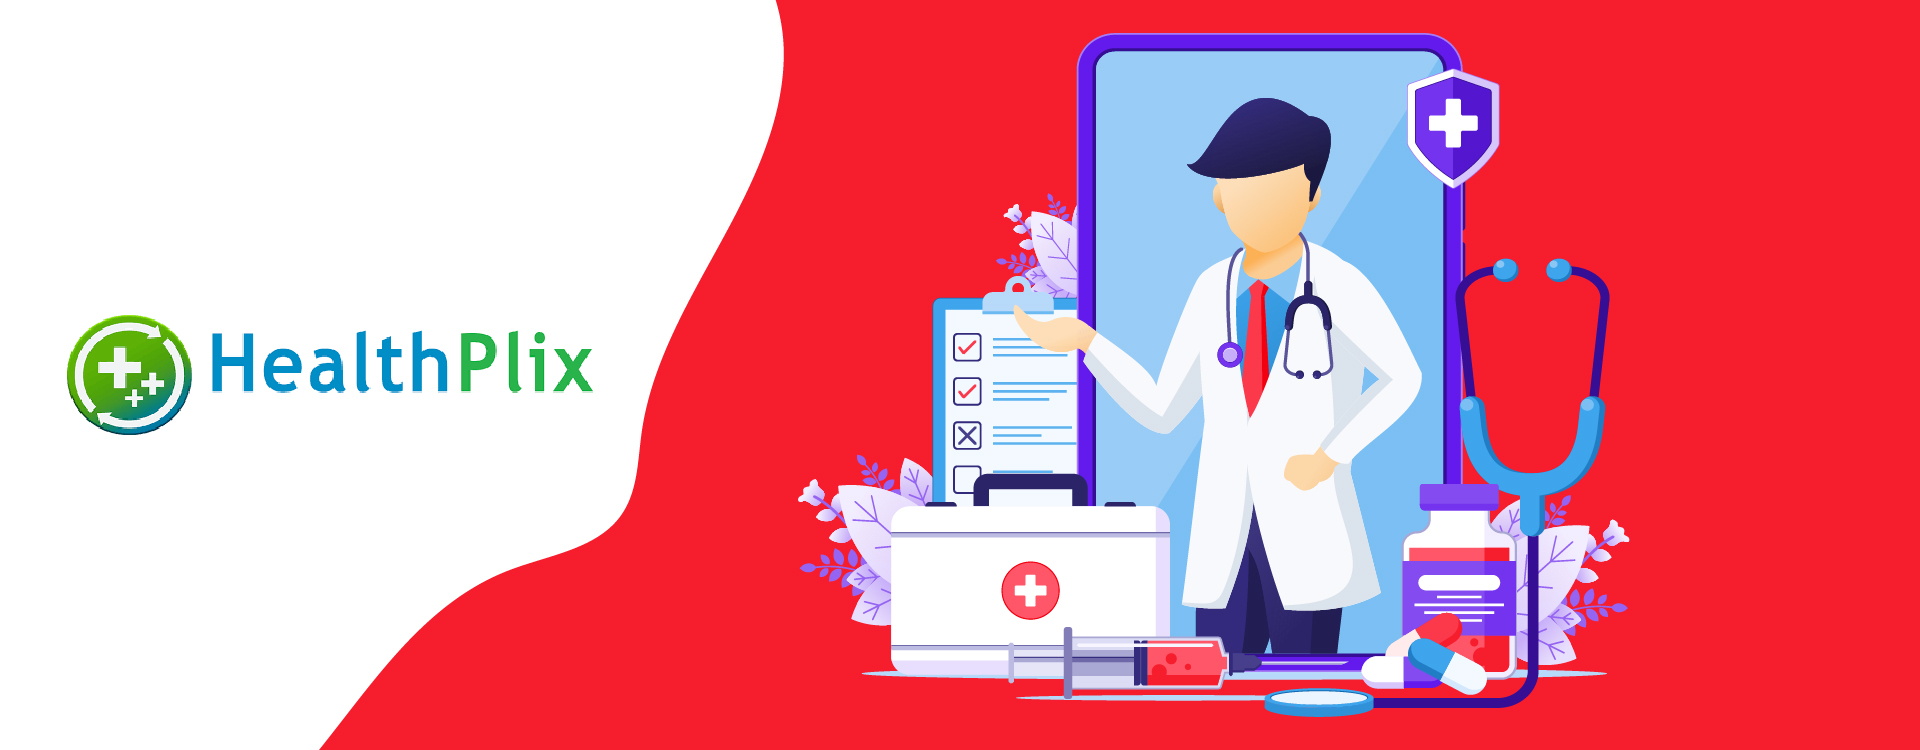 HealthPlix is revolutionizing the healthcare industry by AI and vernacular content to manage chronic diseases.